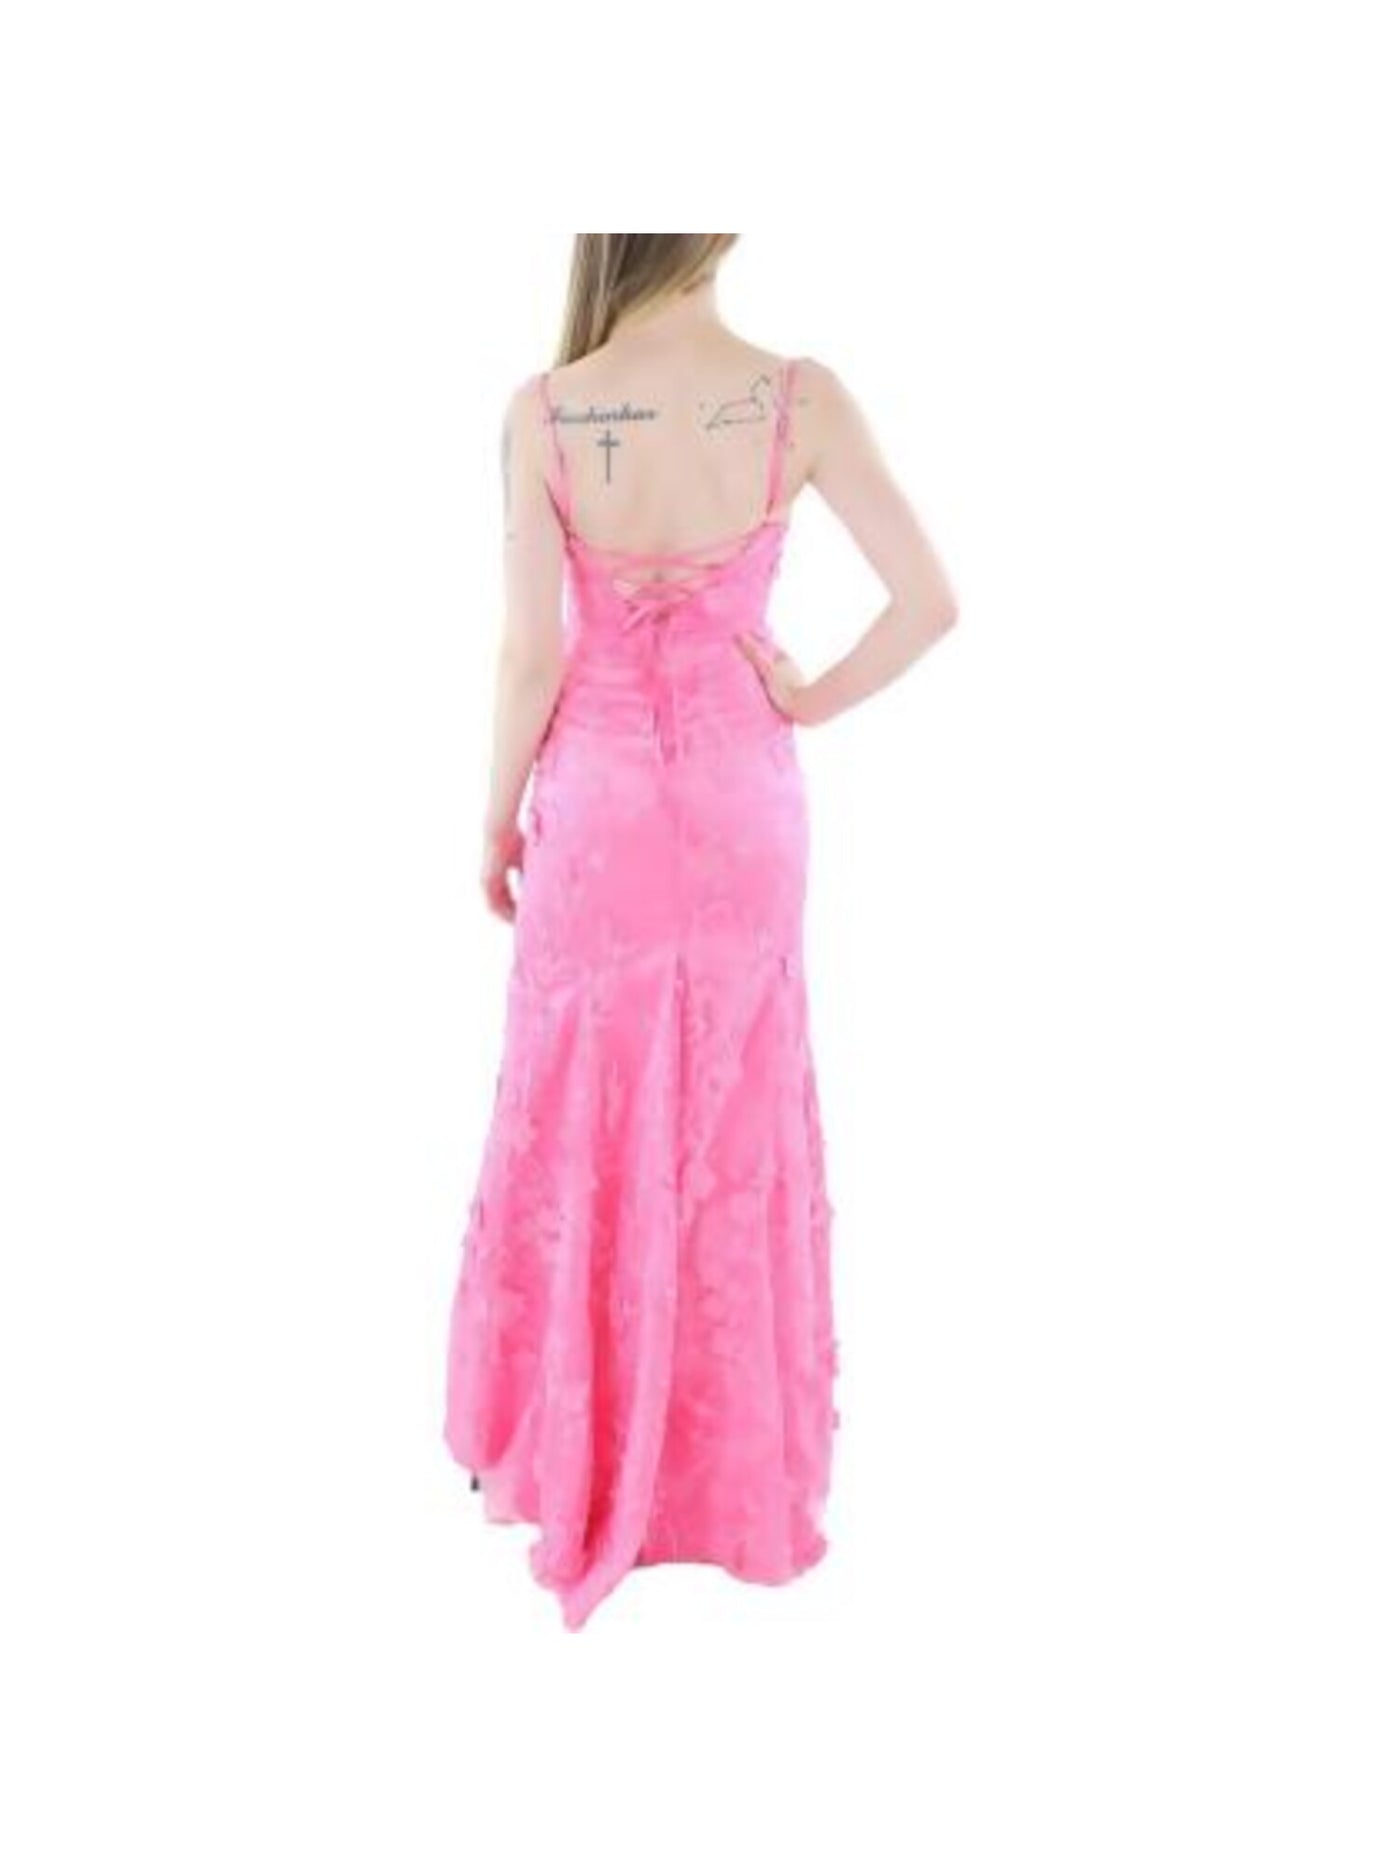 DEAR MOON Womens Pink Zippered Slitted Lace-up Back Lined Spaghetti Strap Scoop Neck Full-Length Evening Gown Dress Juniors 7